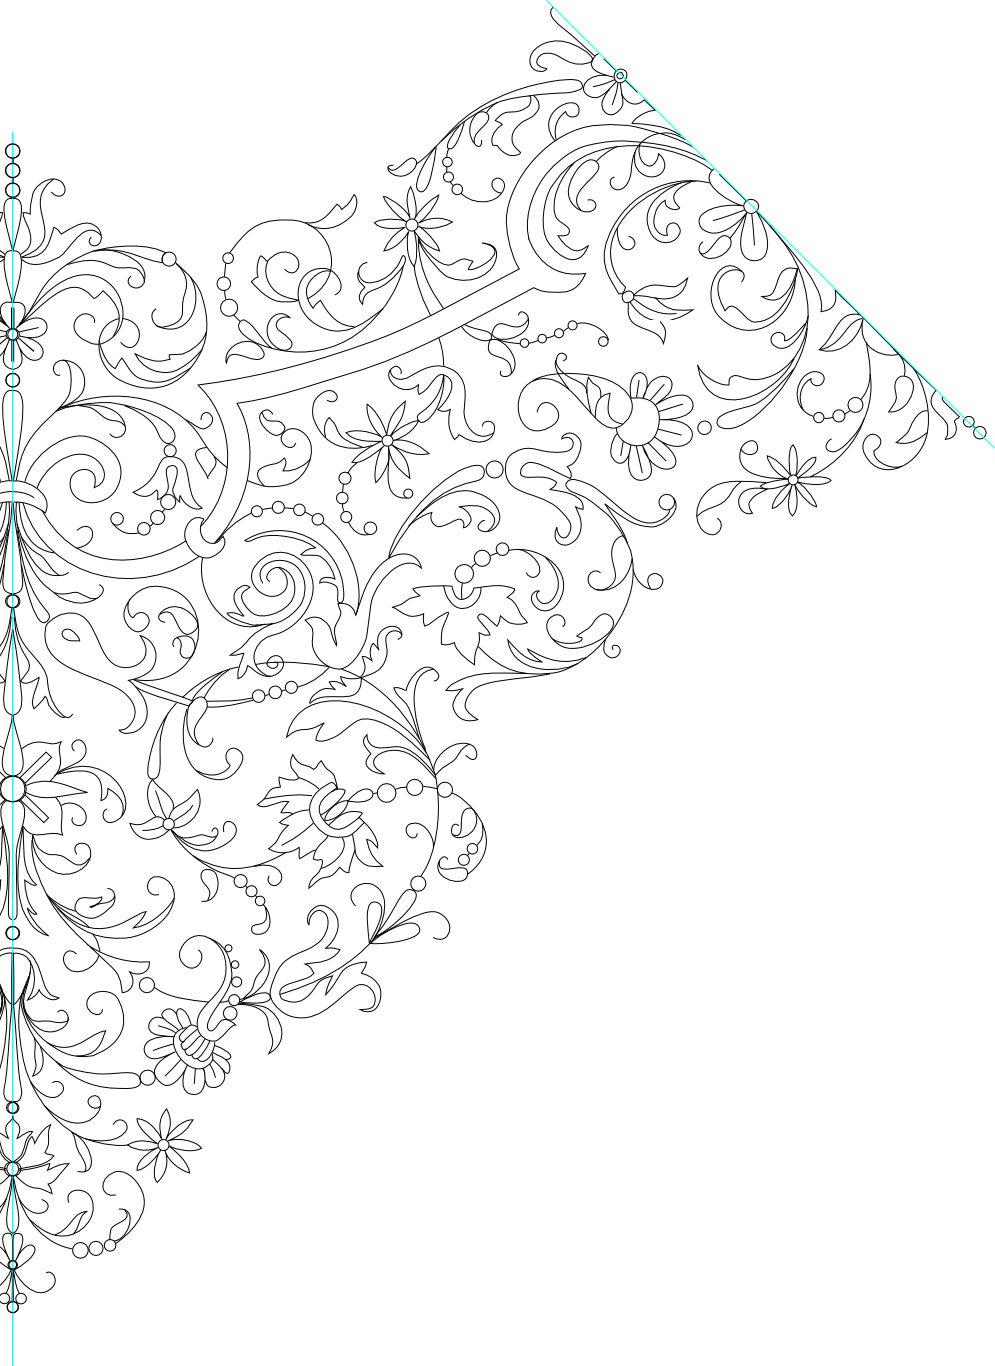 handkerchief_embroidery_pattern_lineart_by_kithplana-d4jxc67.png